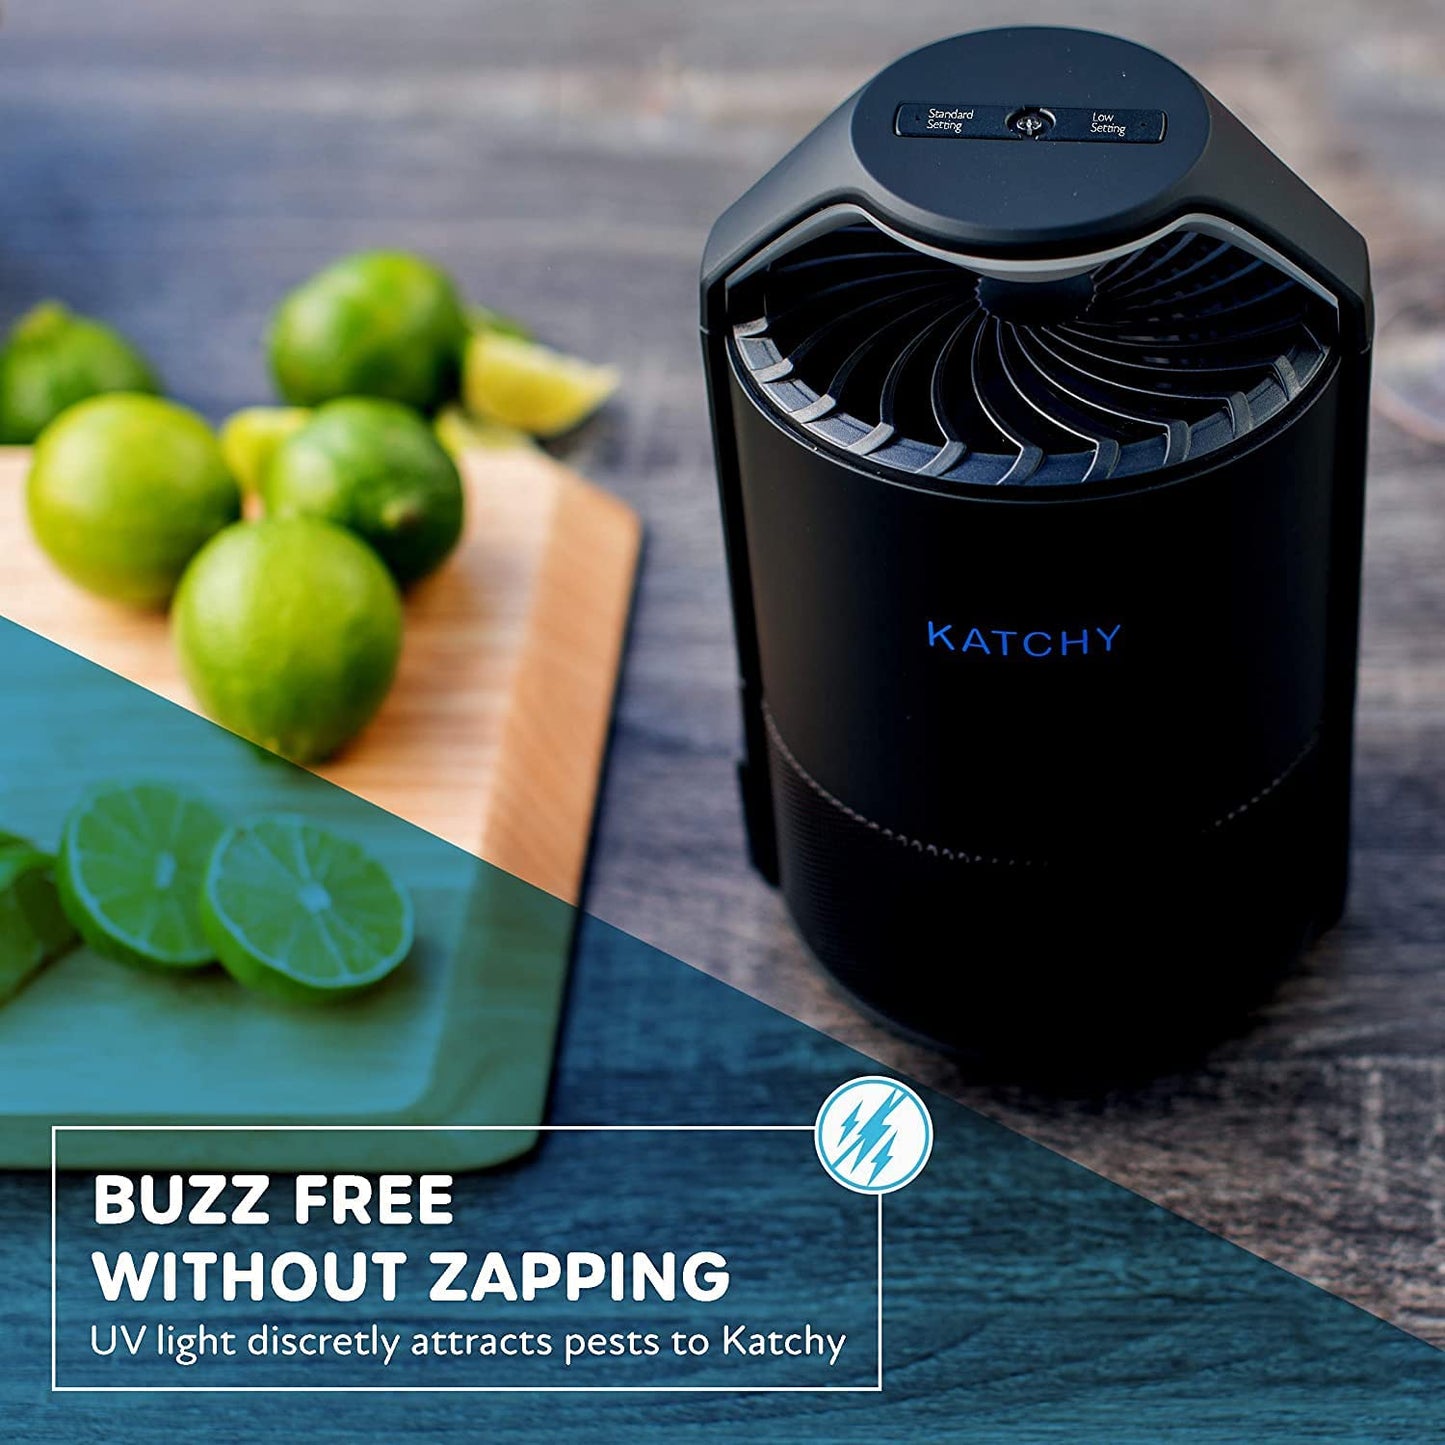 Katchy Indoor Insect Trap - Catcher & Killer for Mosquito, Gnat, Moth, Fruit Flies - Non-Zapper Traps for Buzz-Free Home - Catch Flying Insect Indoors with Suction, Bug Light & Sticky Glue (Black)